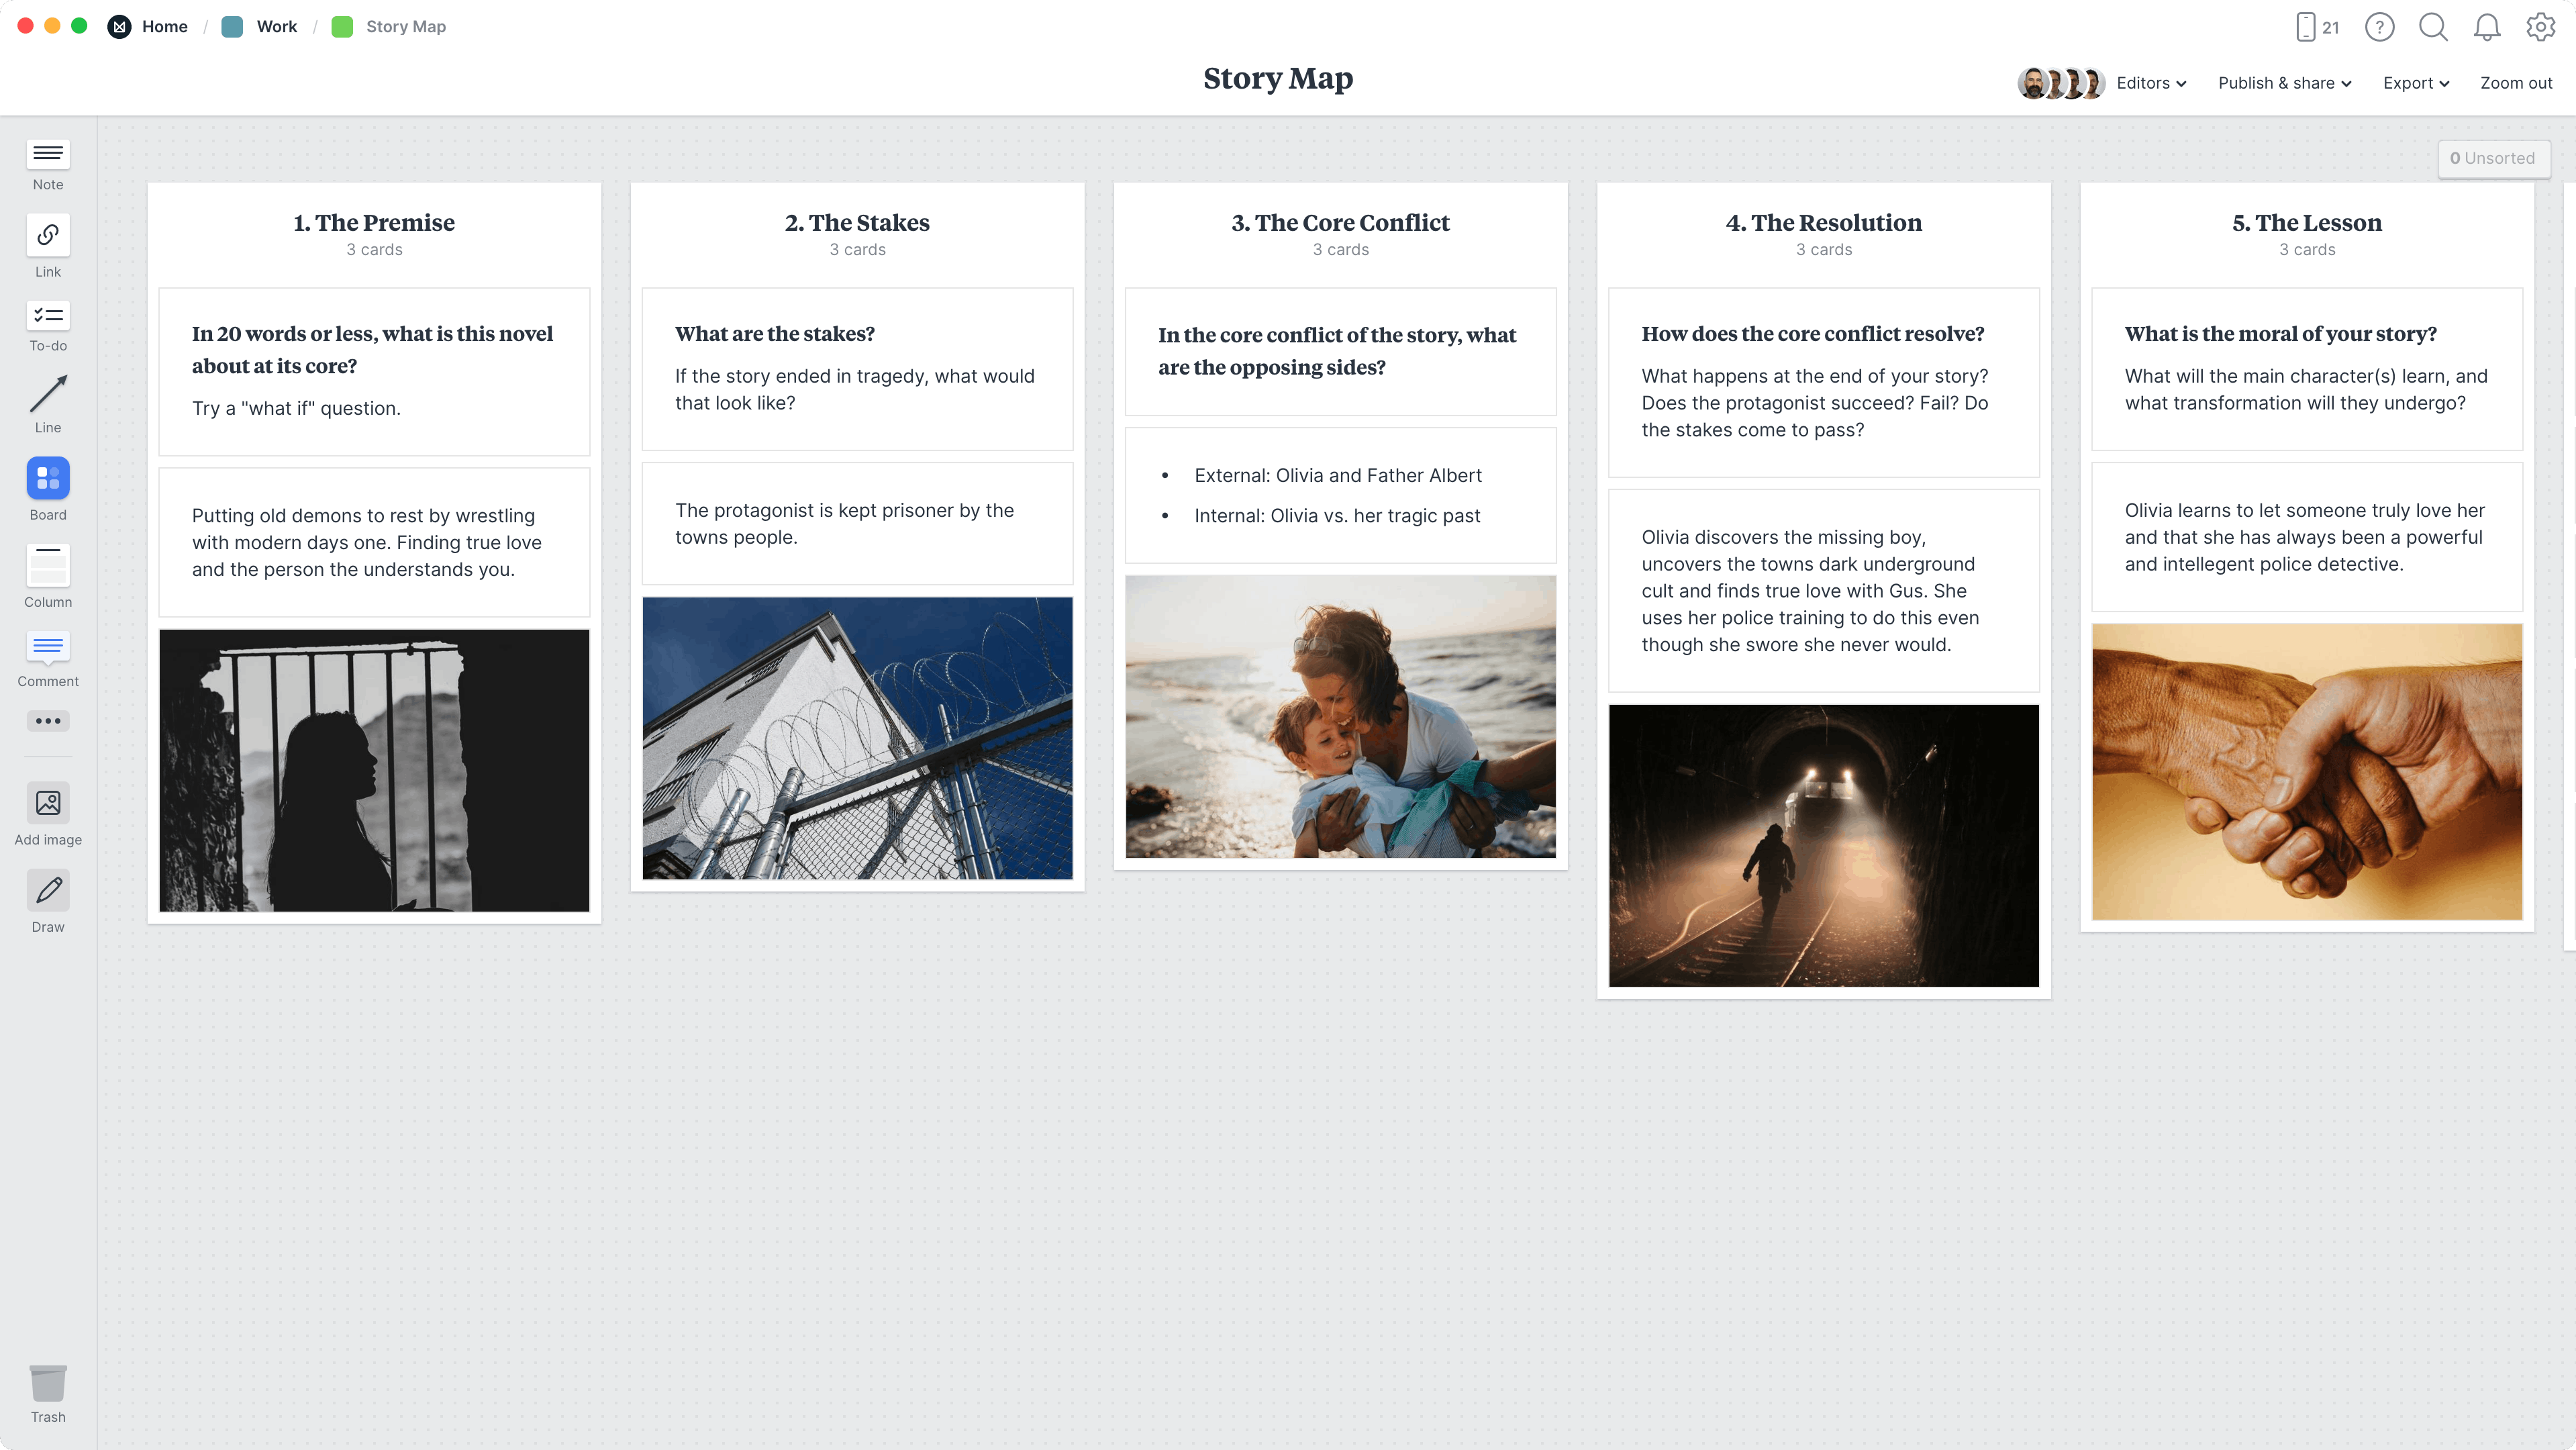 Story Map Template, within the Milanote app